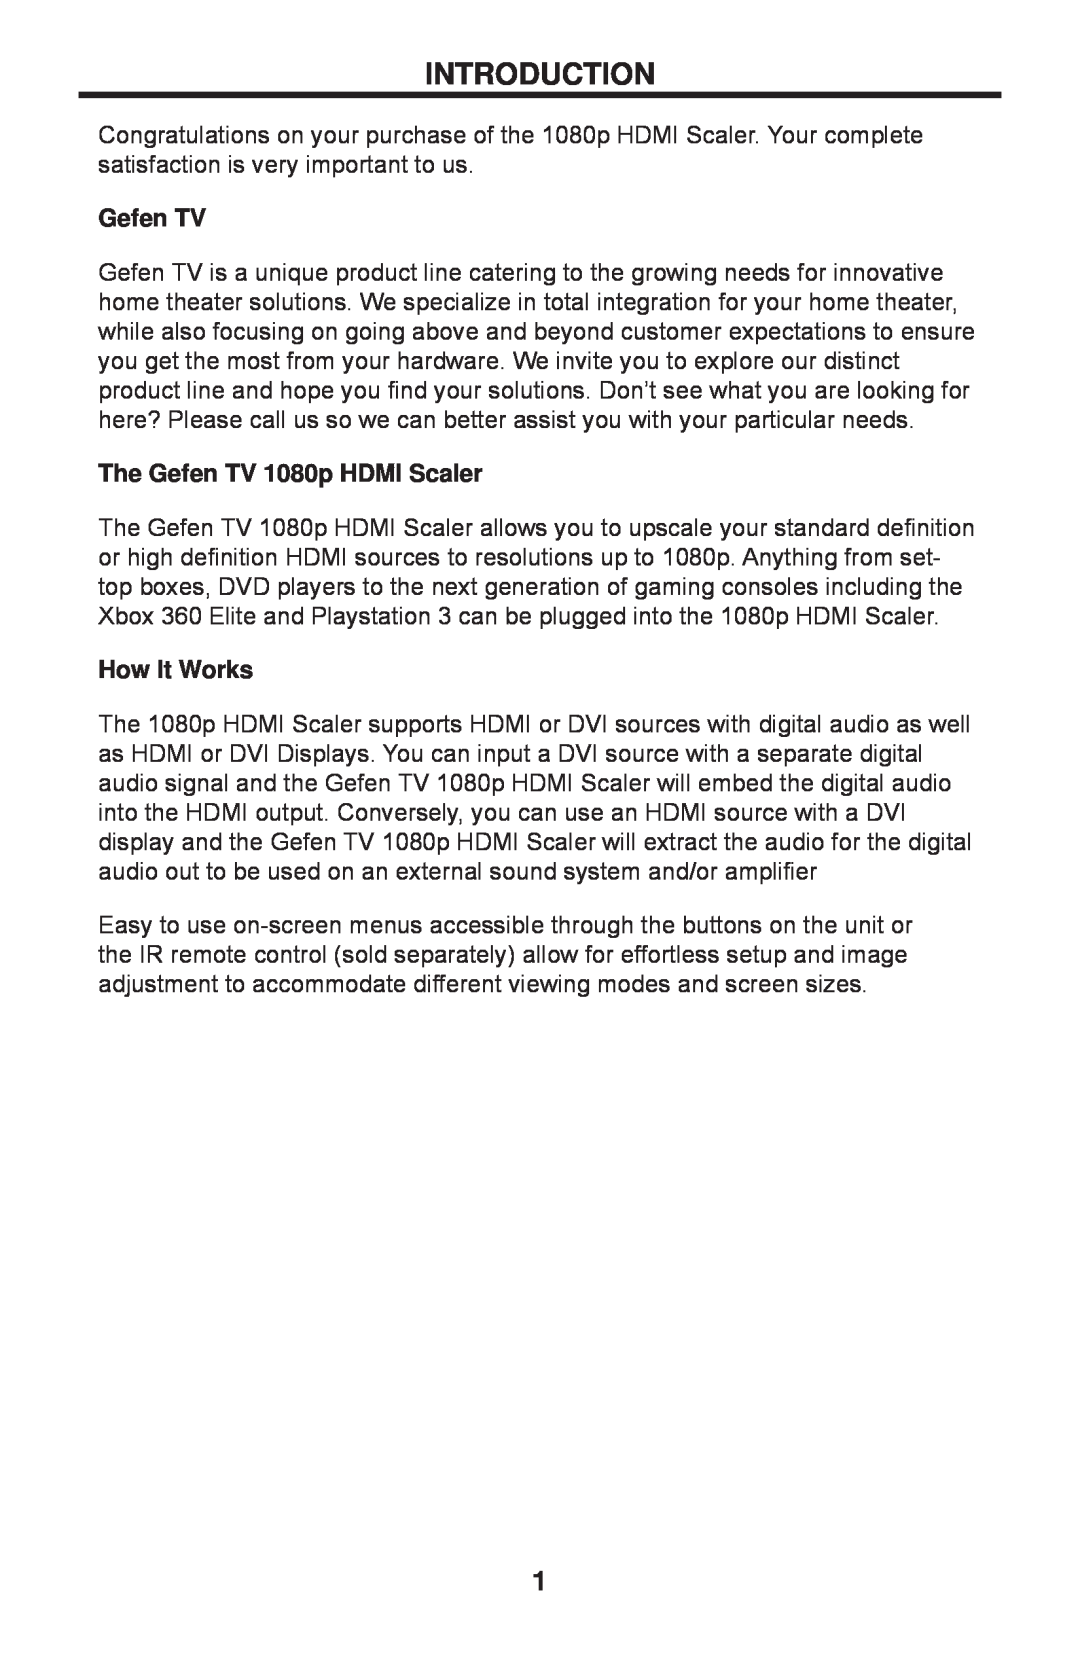 Gefen GTV-HDMI-1080PS user manual Introduction, The Gefen TV 1080p HDMI Scaler, How It Works 